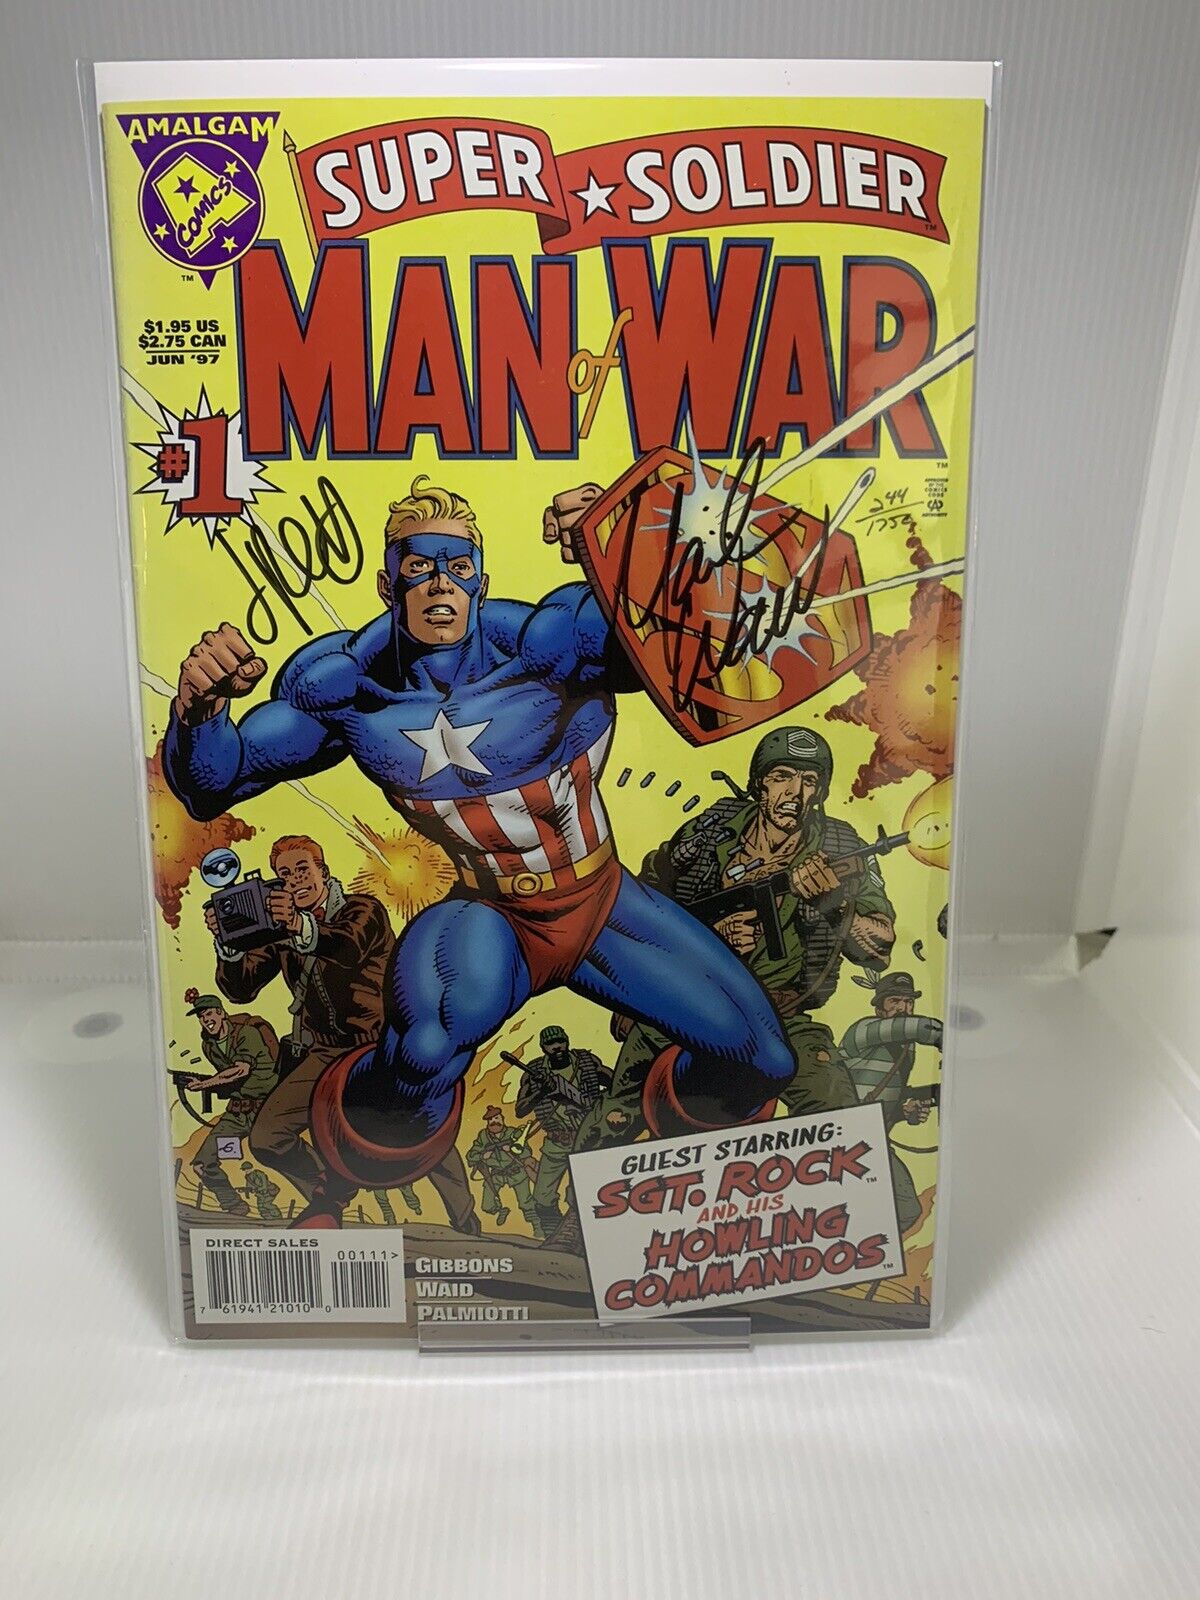 Super Soldier: Man of War #1 1997 Signed By Mark Waid And Jimmy Palmiotti ￼￼